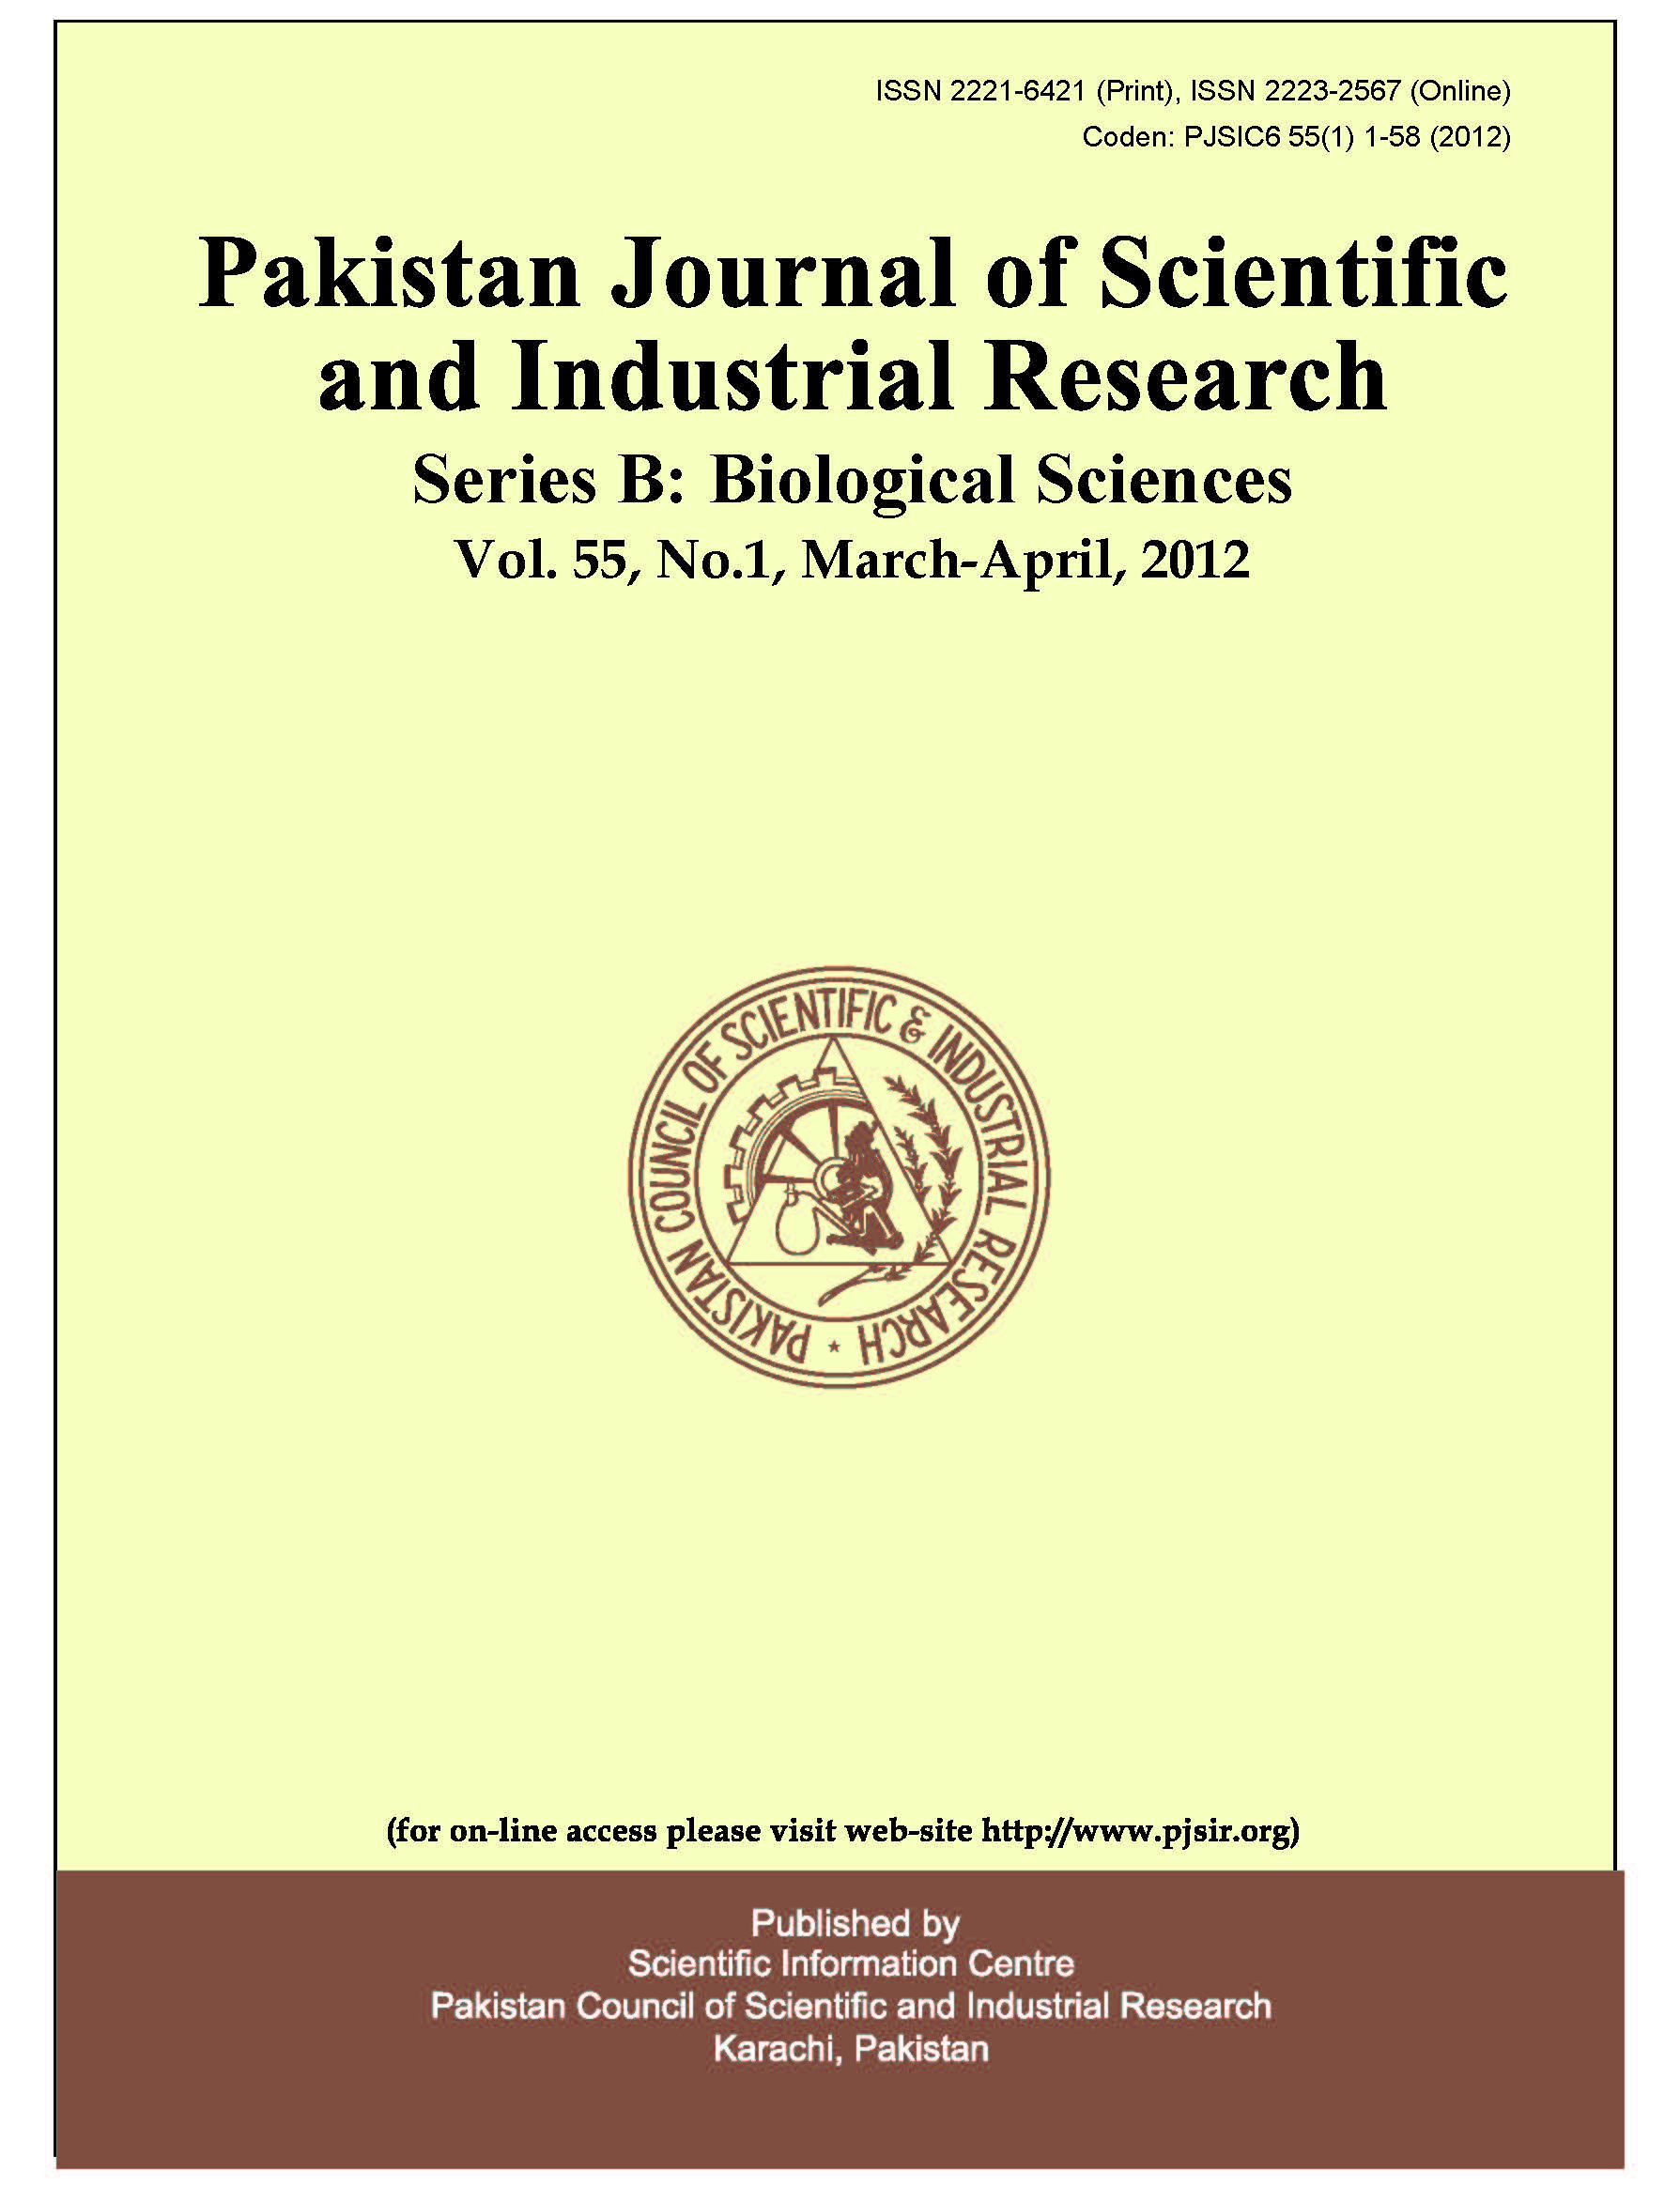 					View Vol. 55 No. 1 (2012): Pakistan Journal of Scientific and Industrial Research  Series B: Biological Sciences
				